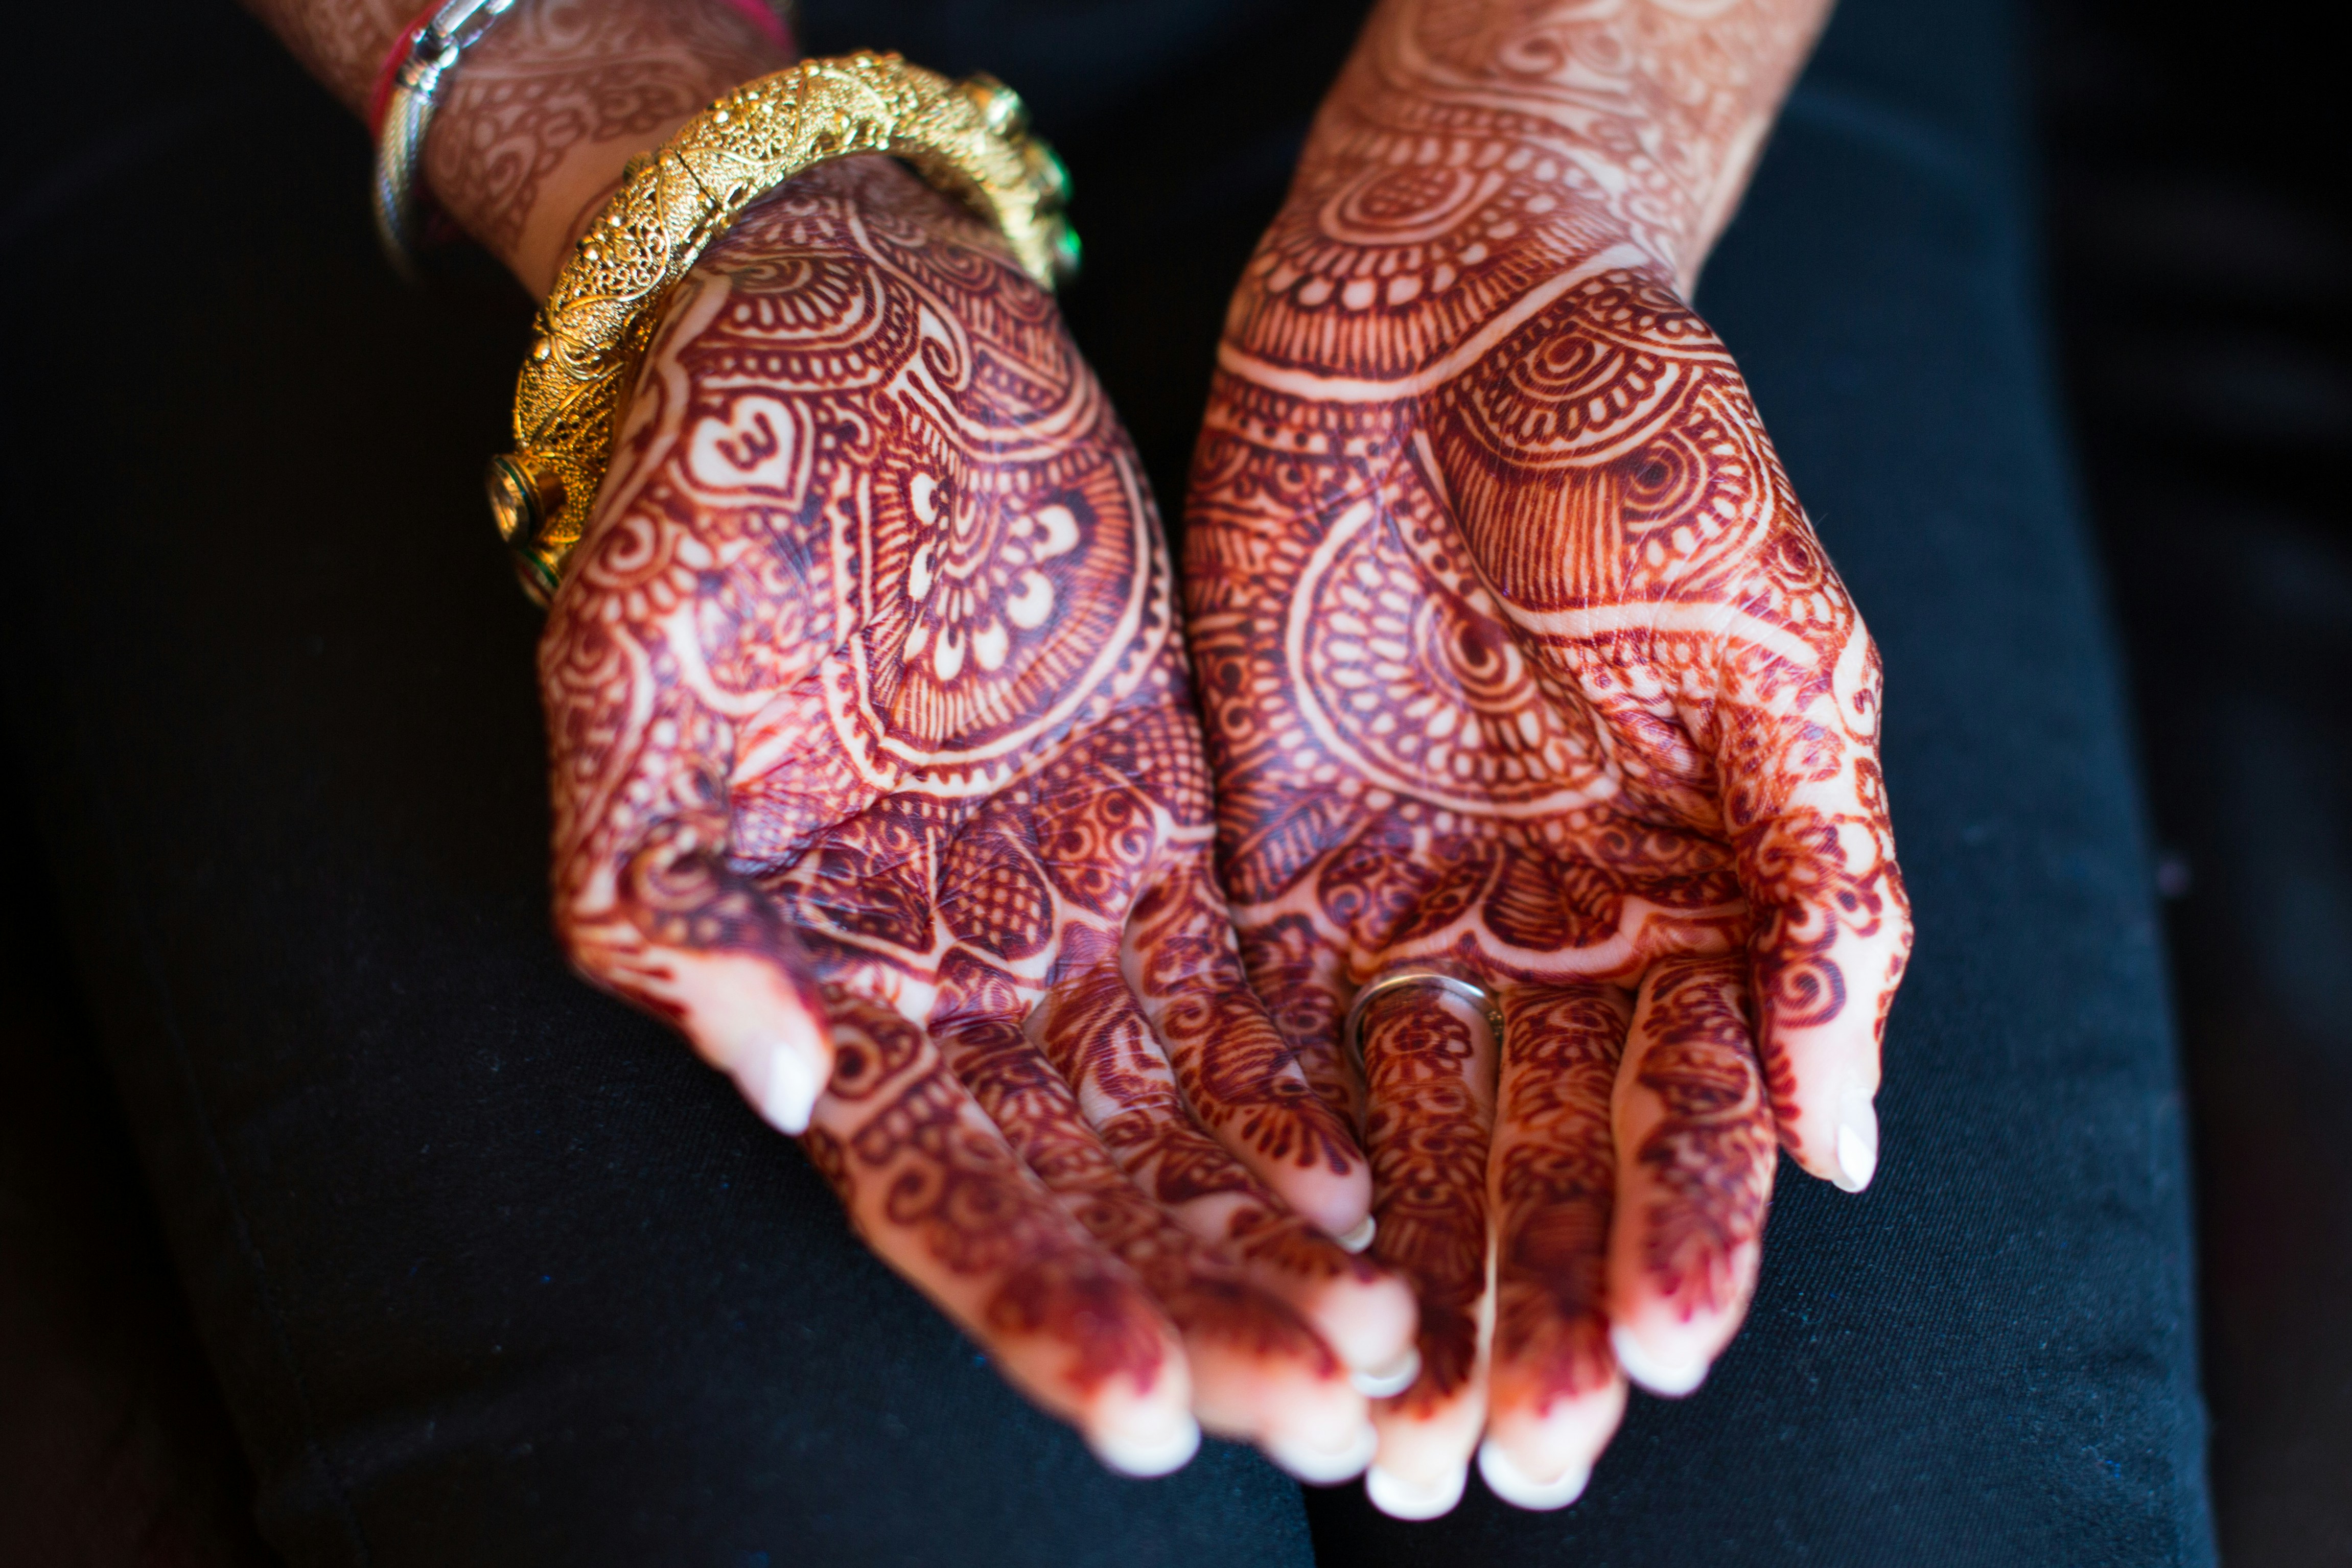 The henna tattooed hands of an Indian bride before her wedding.